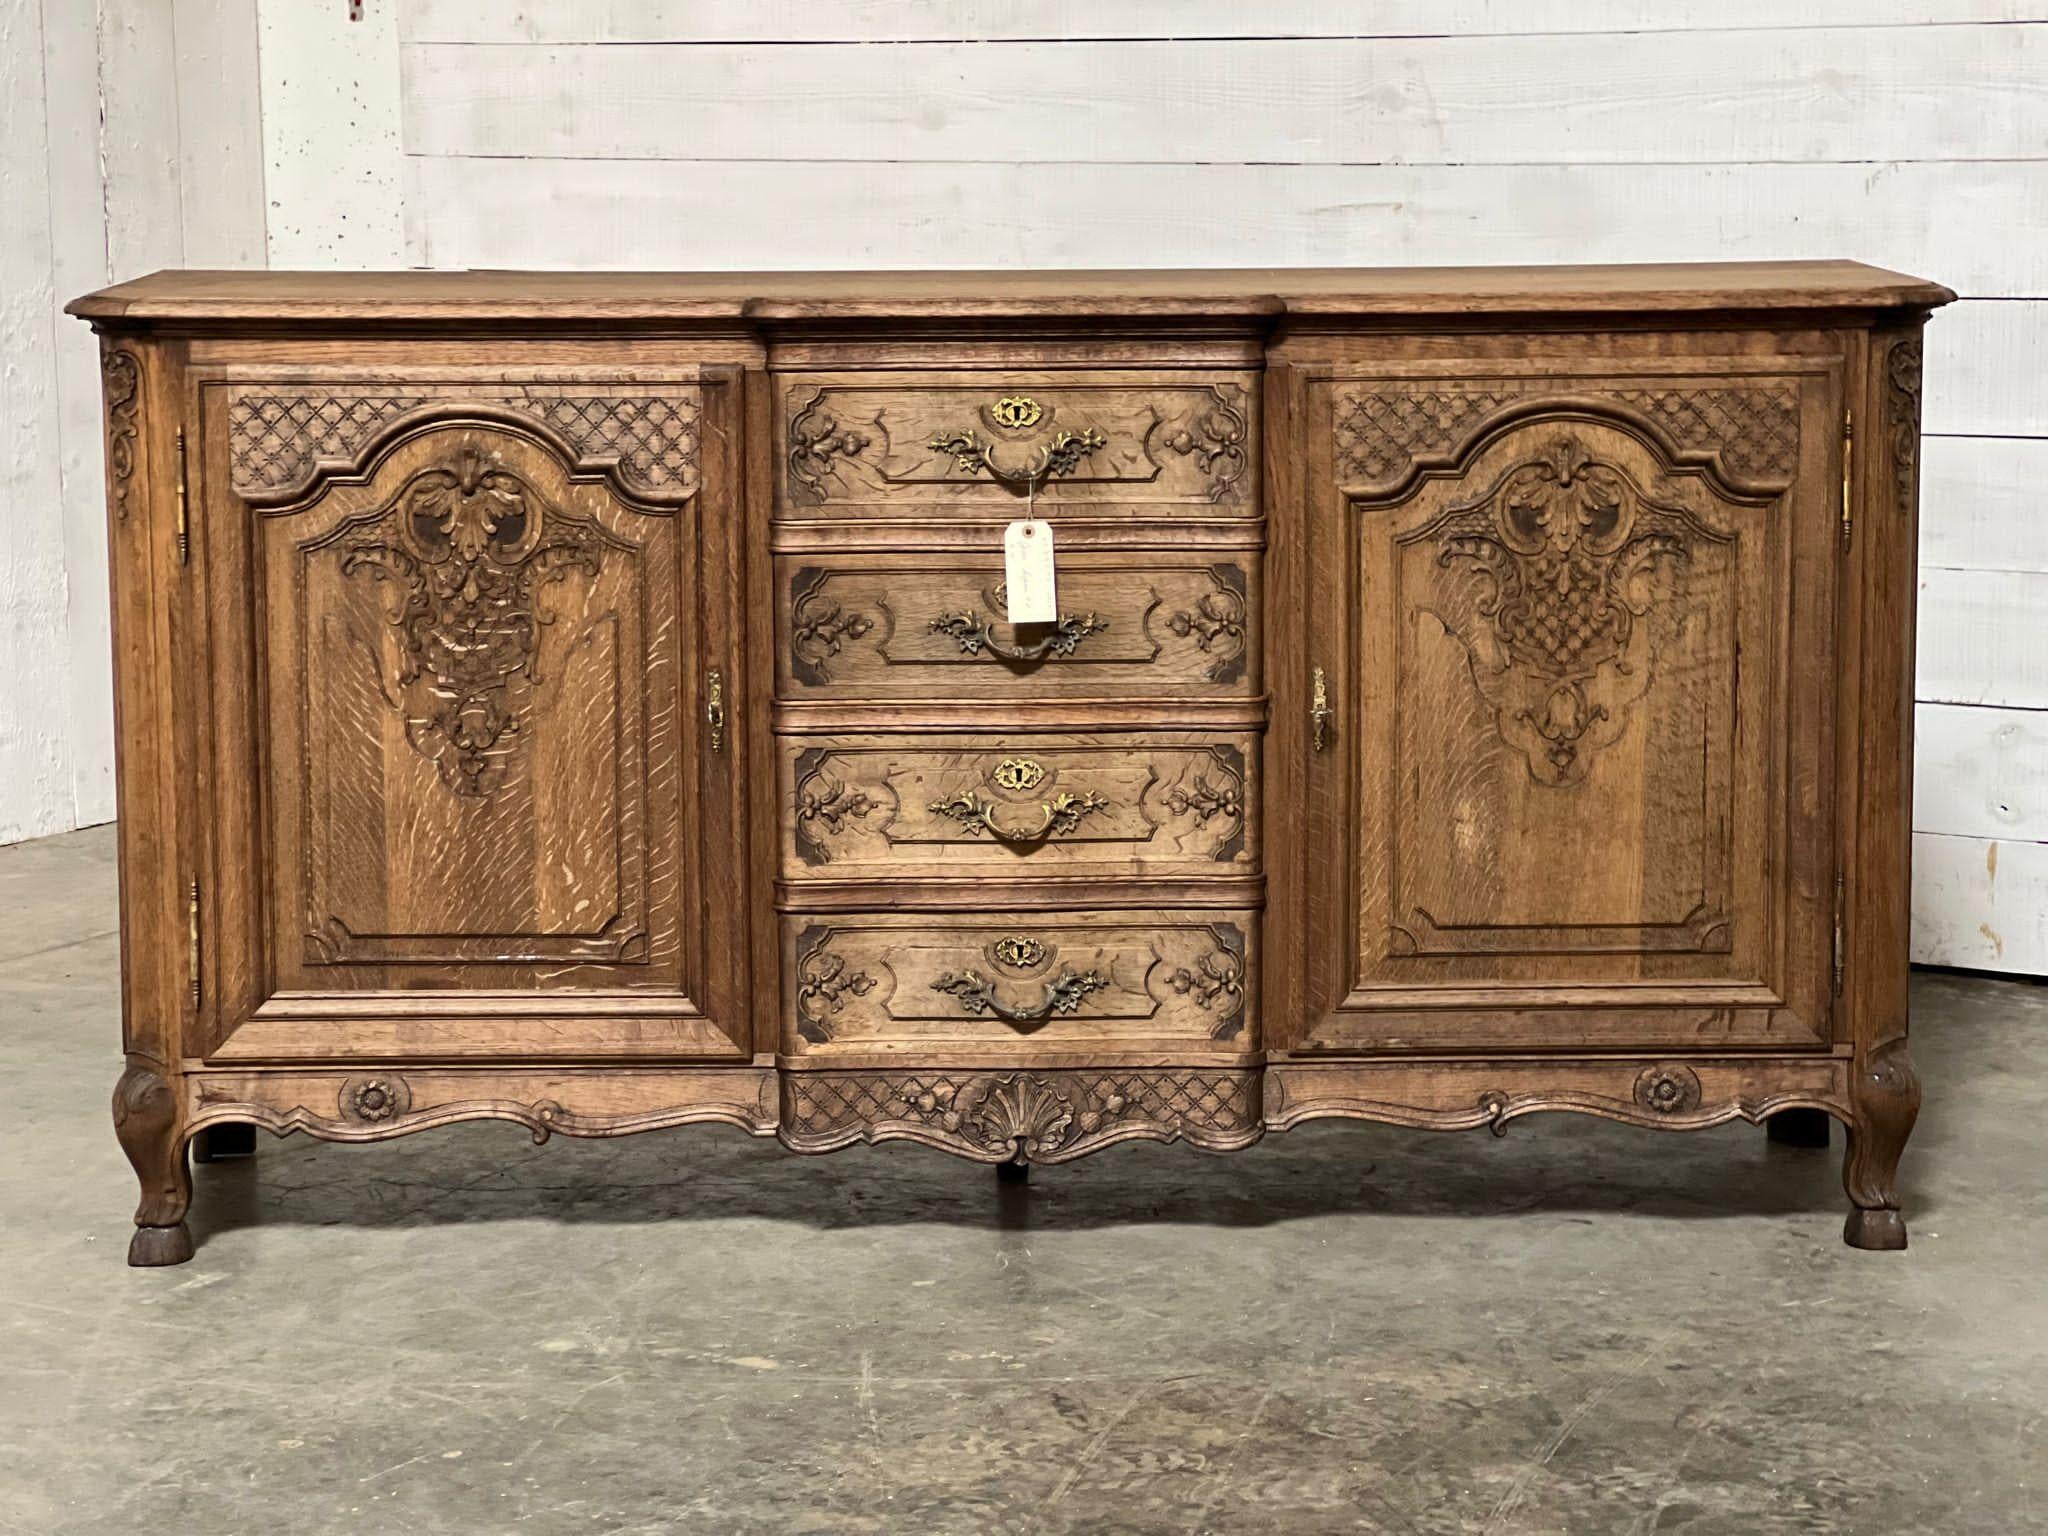 Lovely French Bleached Oak Sideboard or Enfilade 13